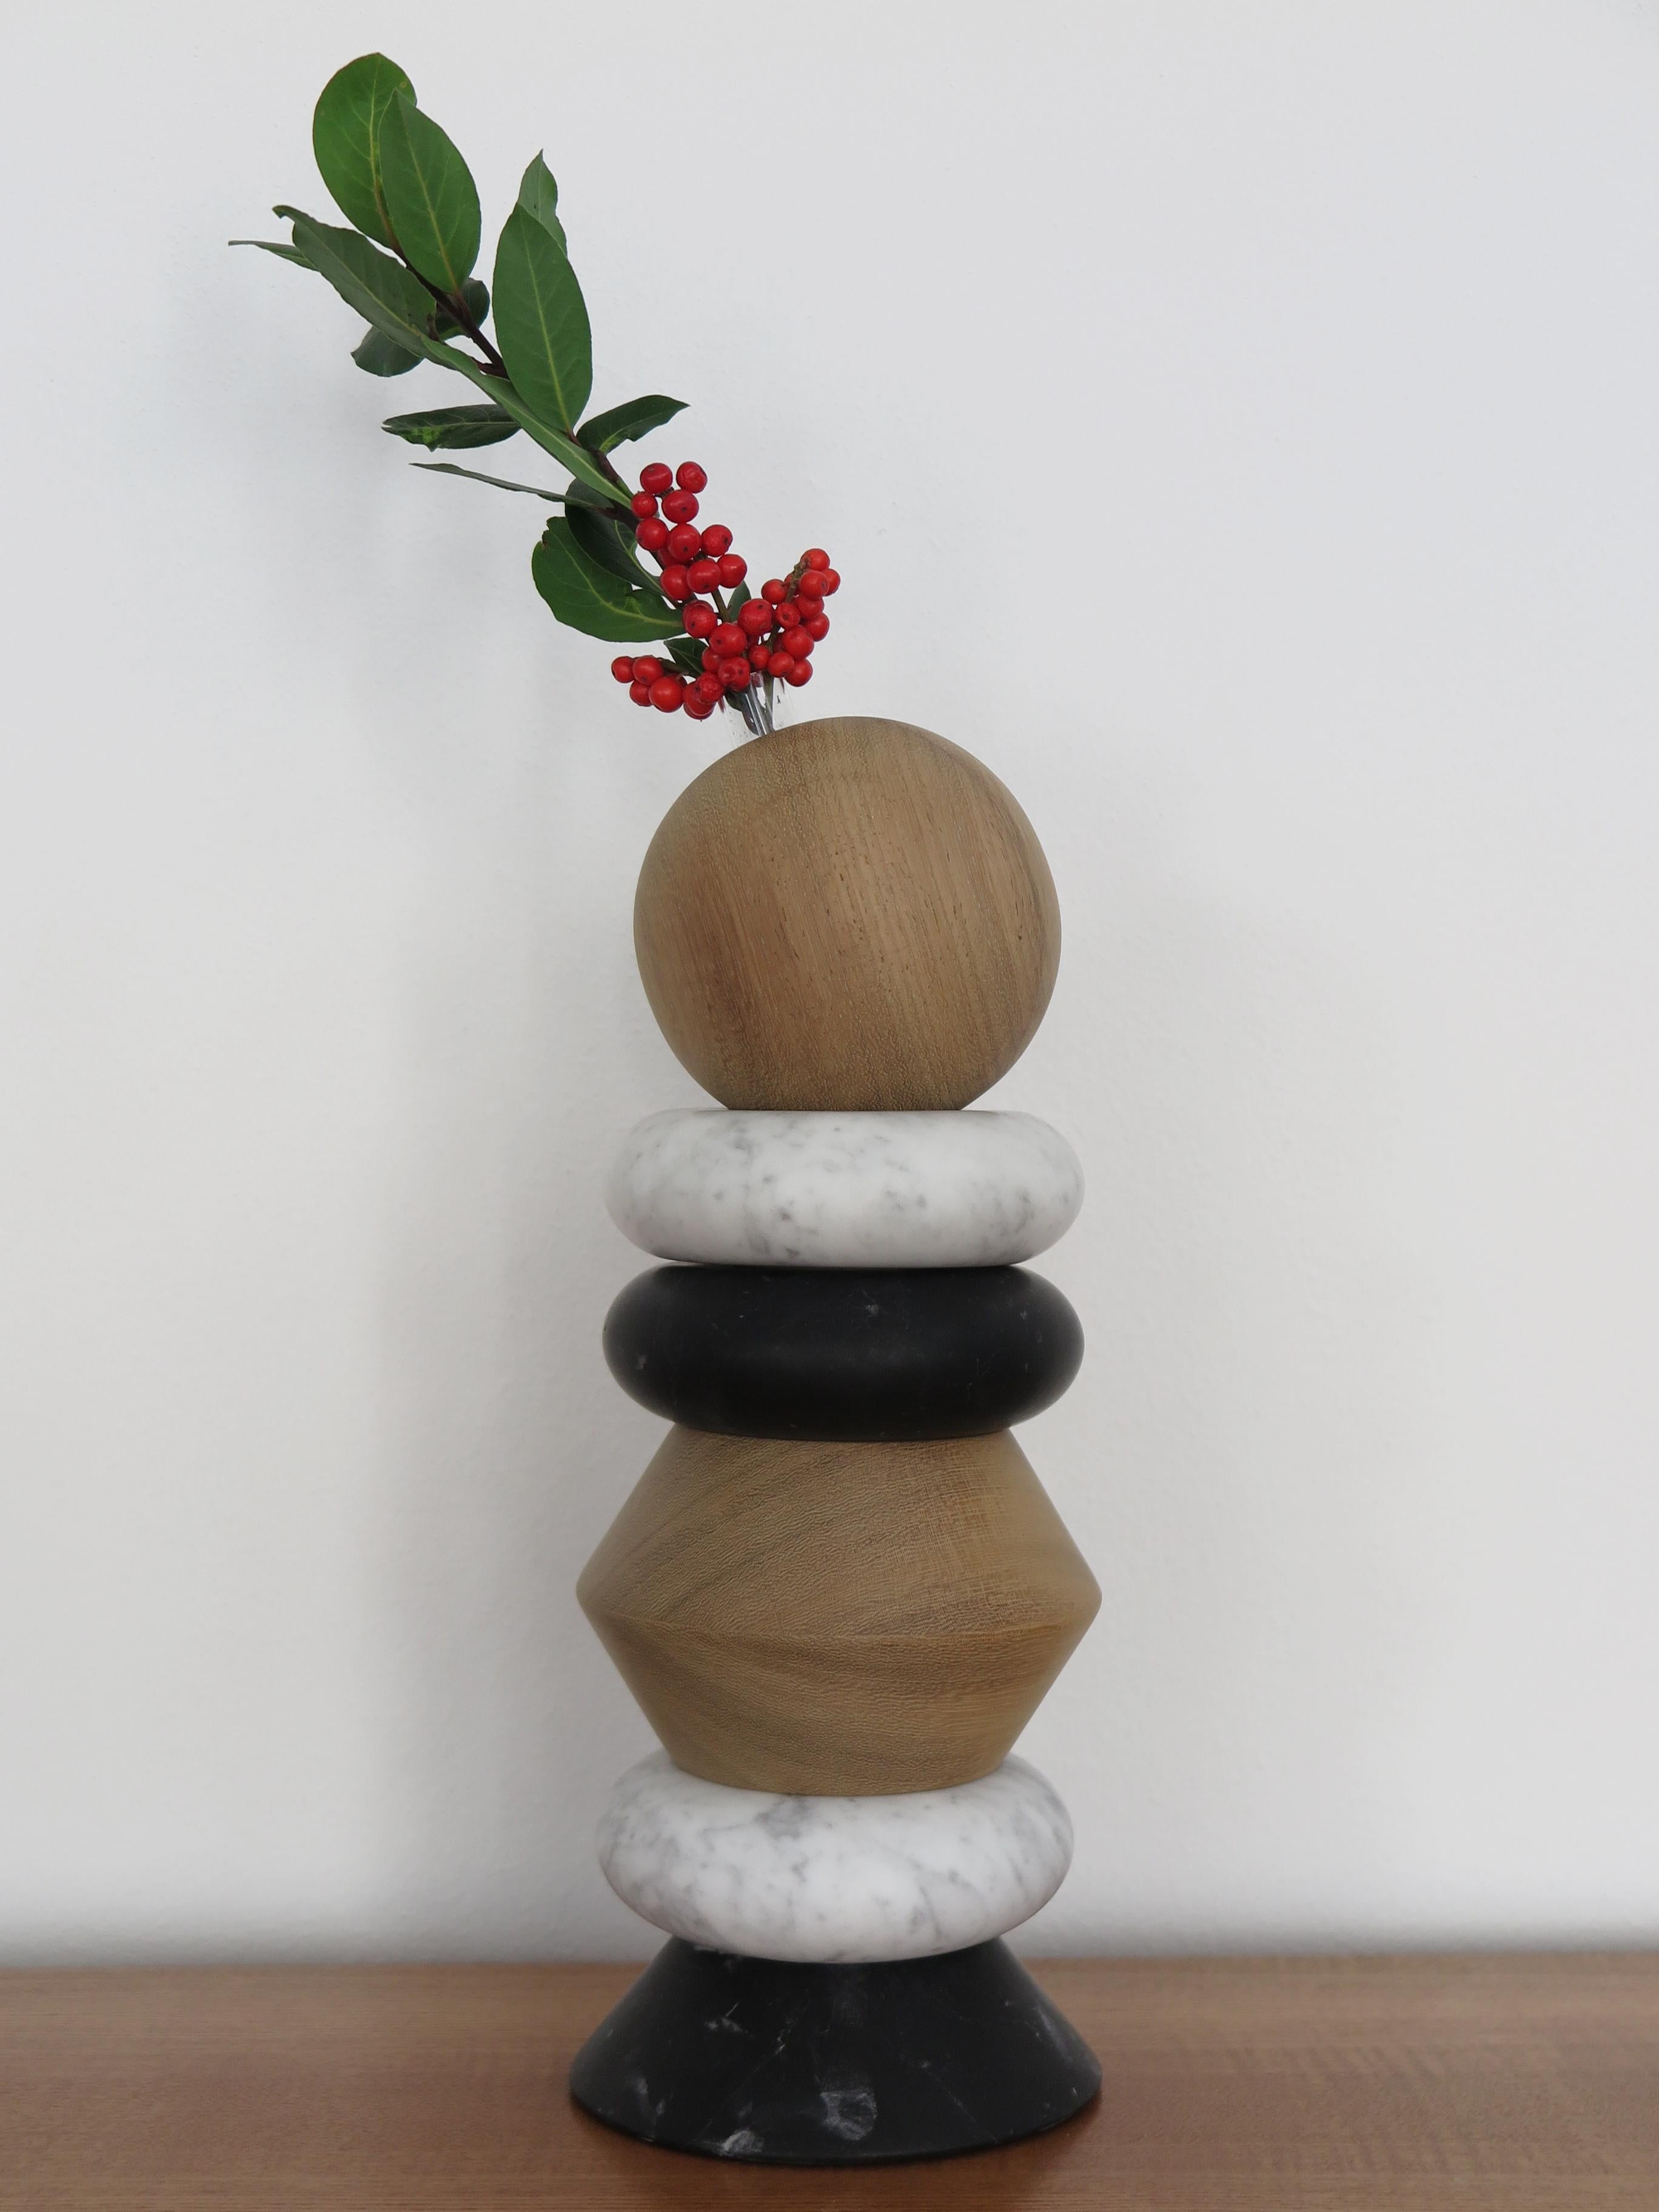 Italian contemporary sculpture, candle holder and flower vase, modular as you like made up of white marble Carrara, black marble, and solid wood with including two glass vases for fresh flowers.
The various elements can be composed and stacked as